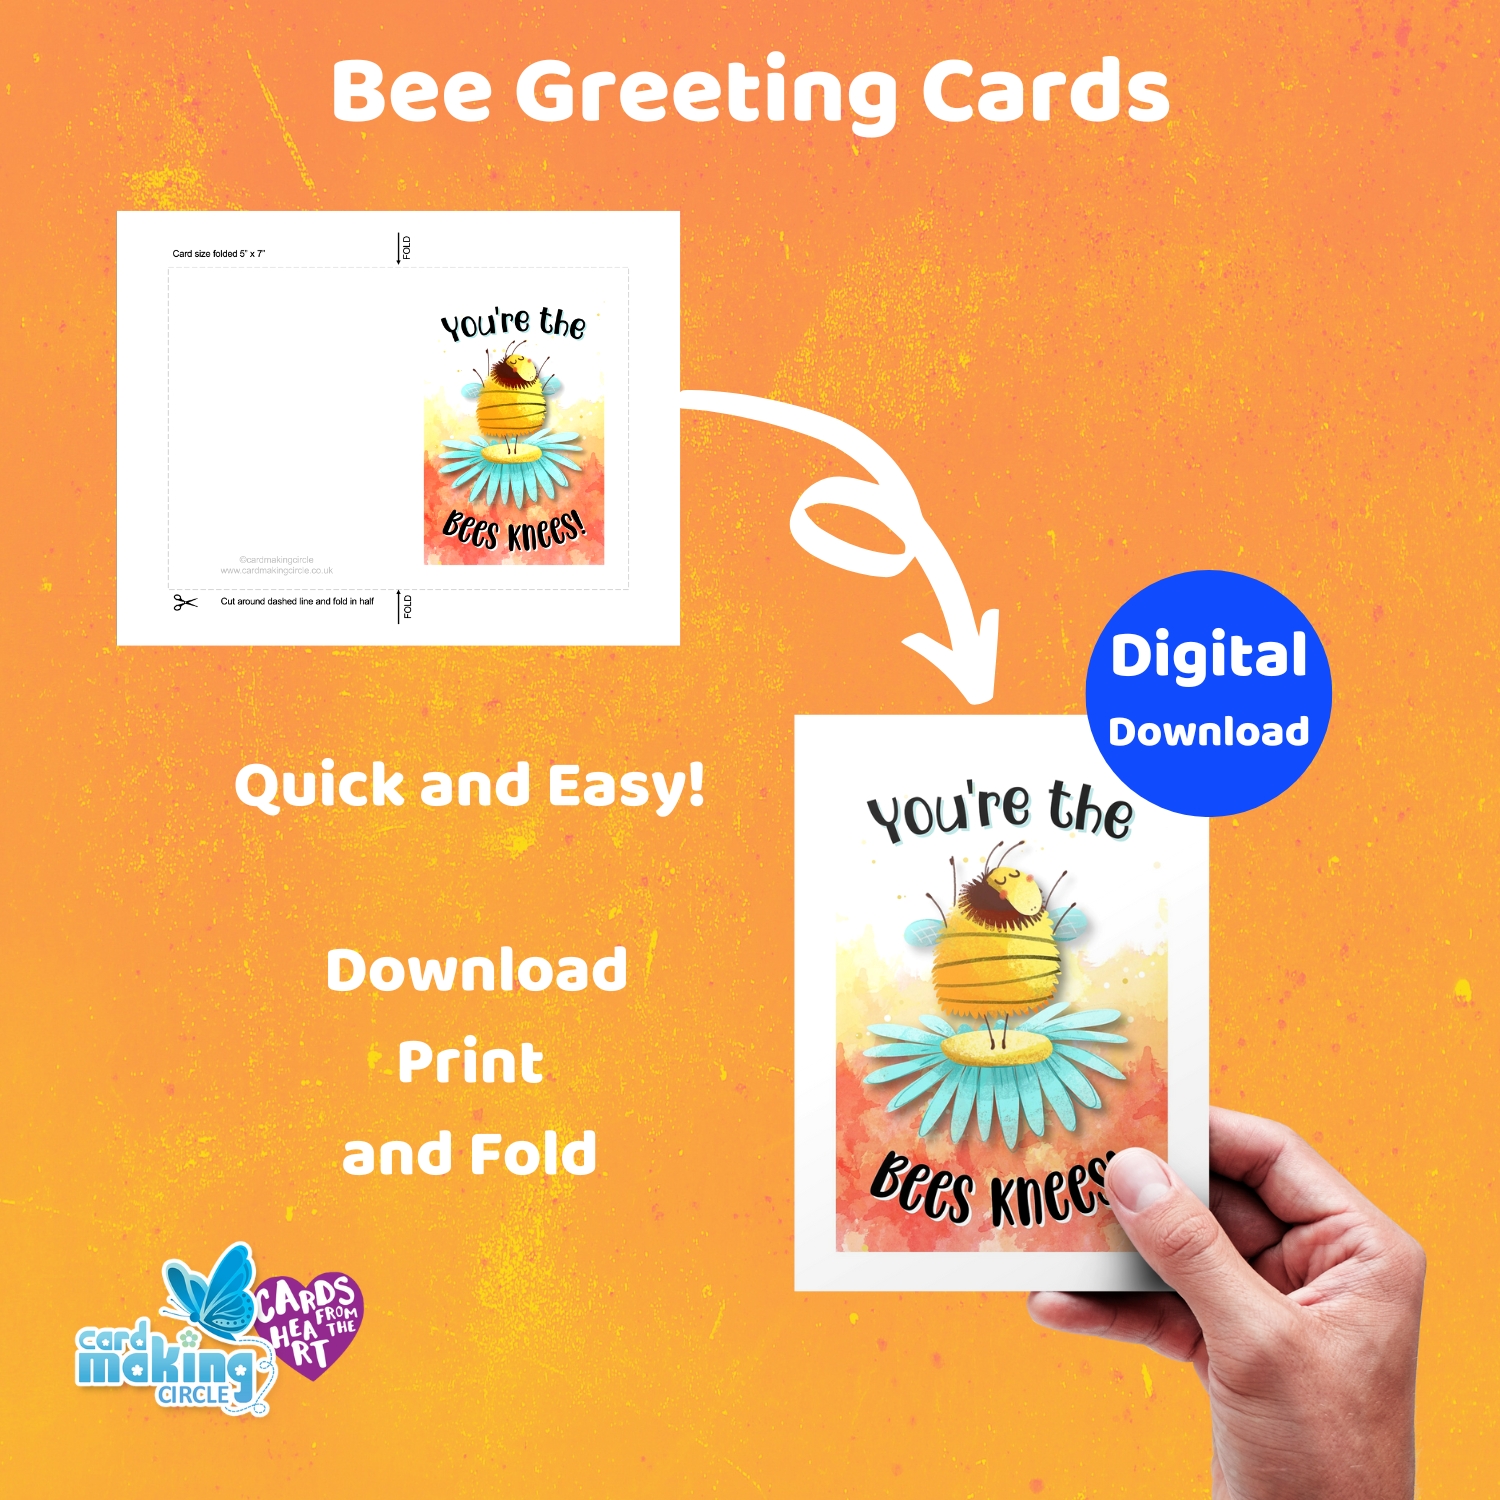 How to turn your digital download for a Bee Greeting Card into a 5" x 7" card.